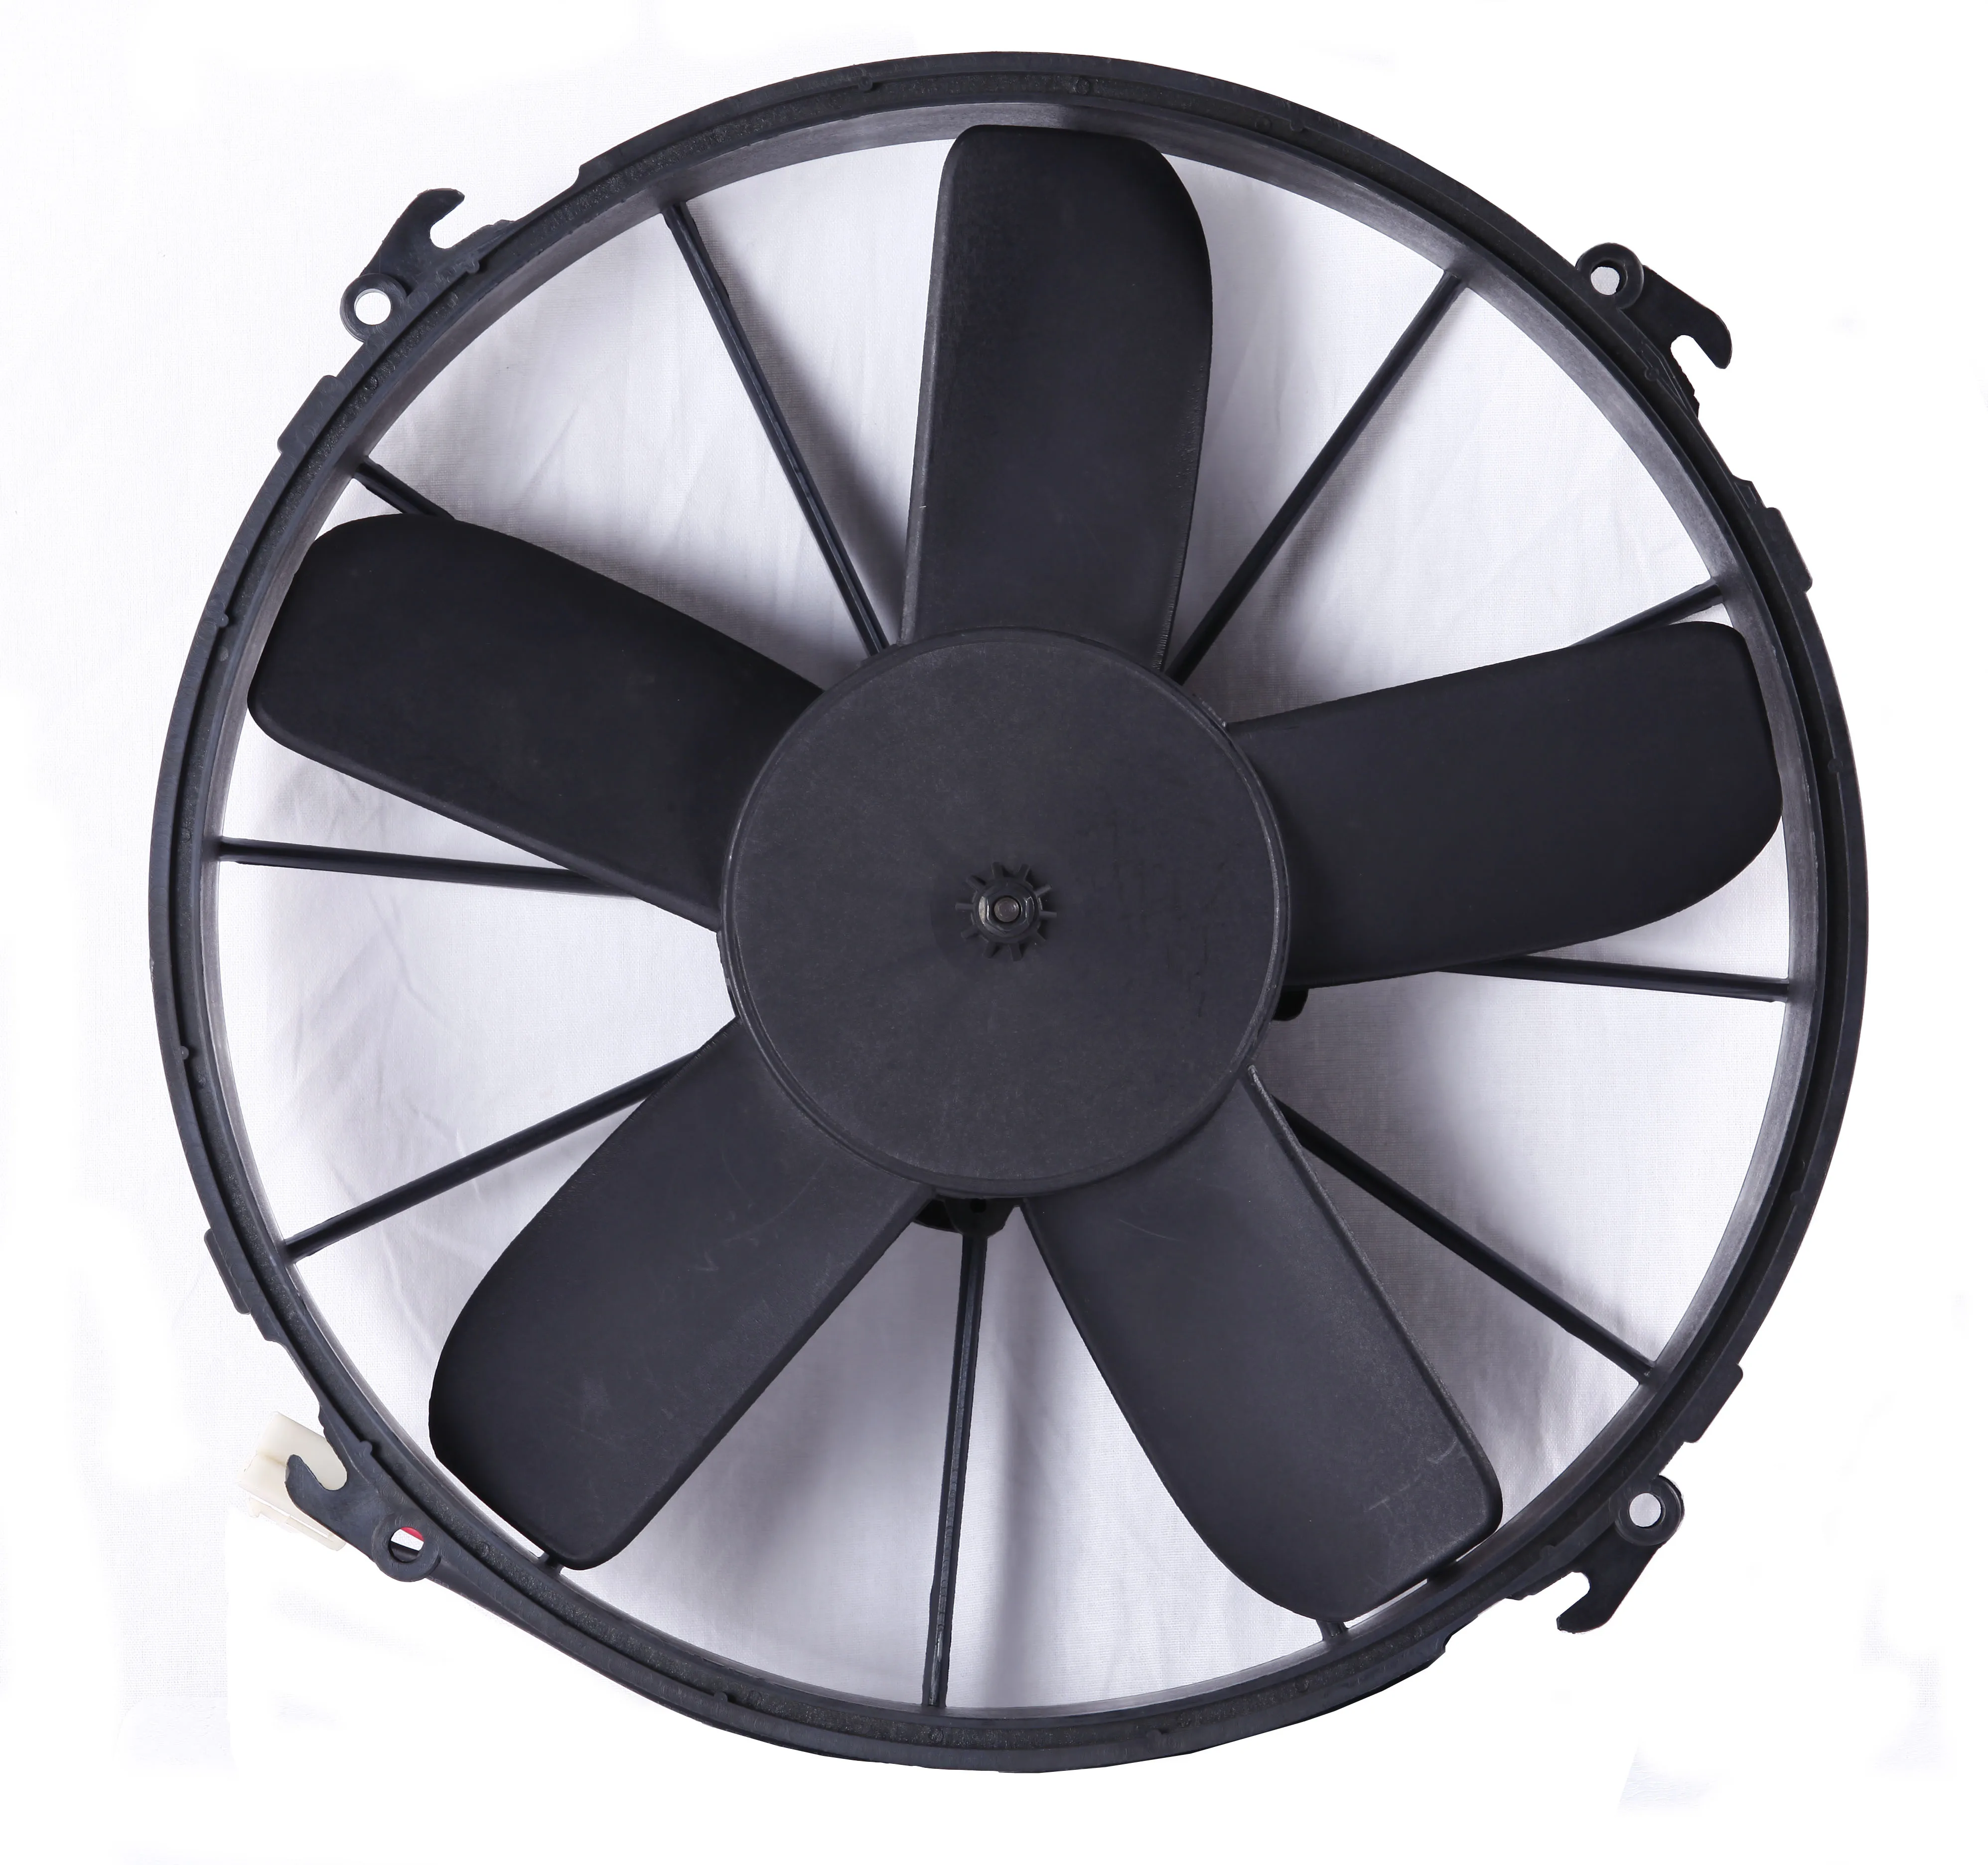 12V and 24V DC brush motor axial fan replace spal VA01 series for bus condenser fan push and pull from China manufacture (309651806)